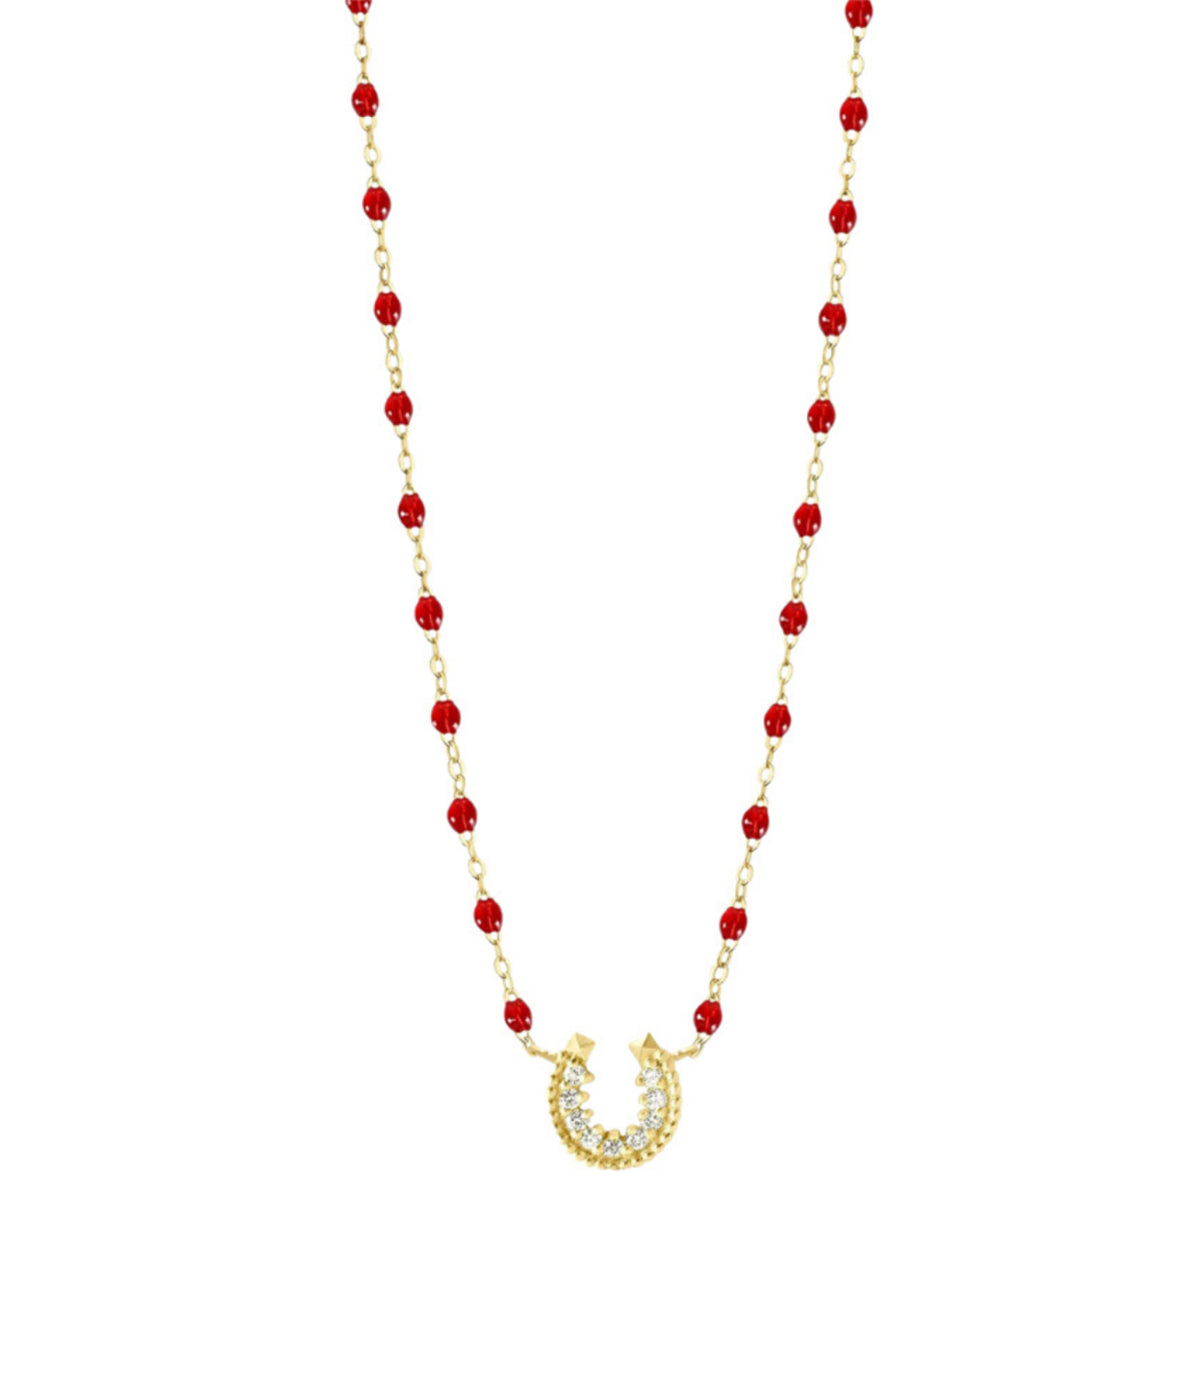 Horse Shoe 45cm Necklace 18K Yellow Gold & Ruby